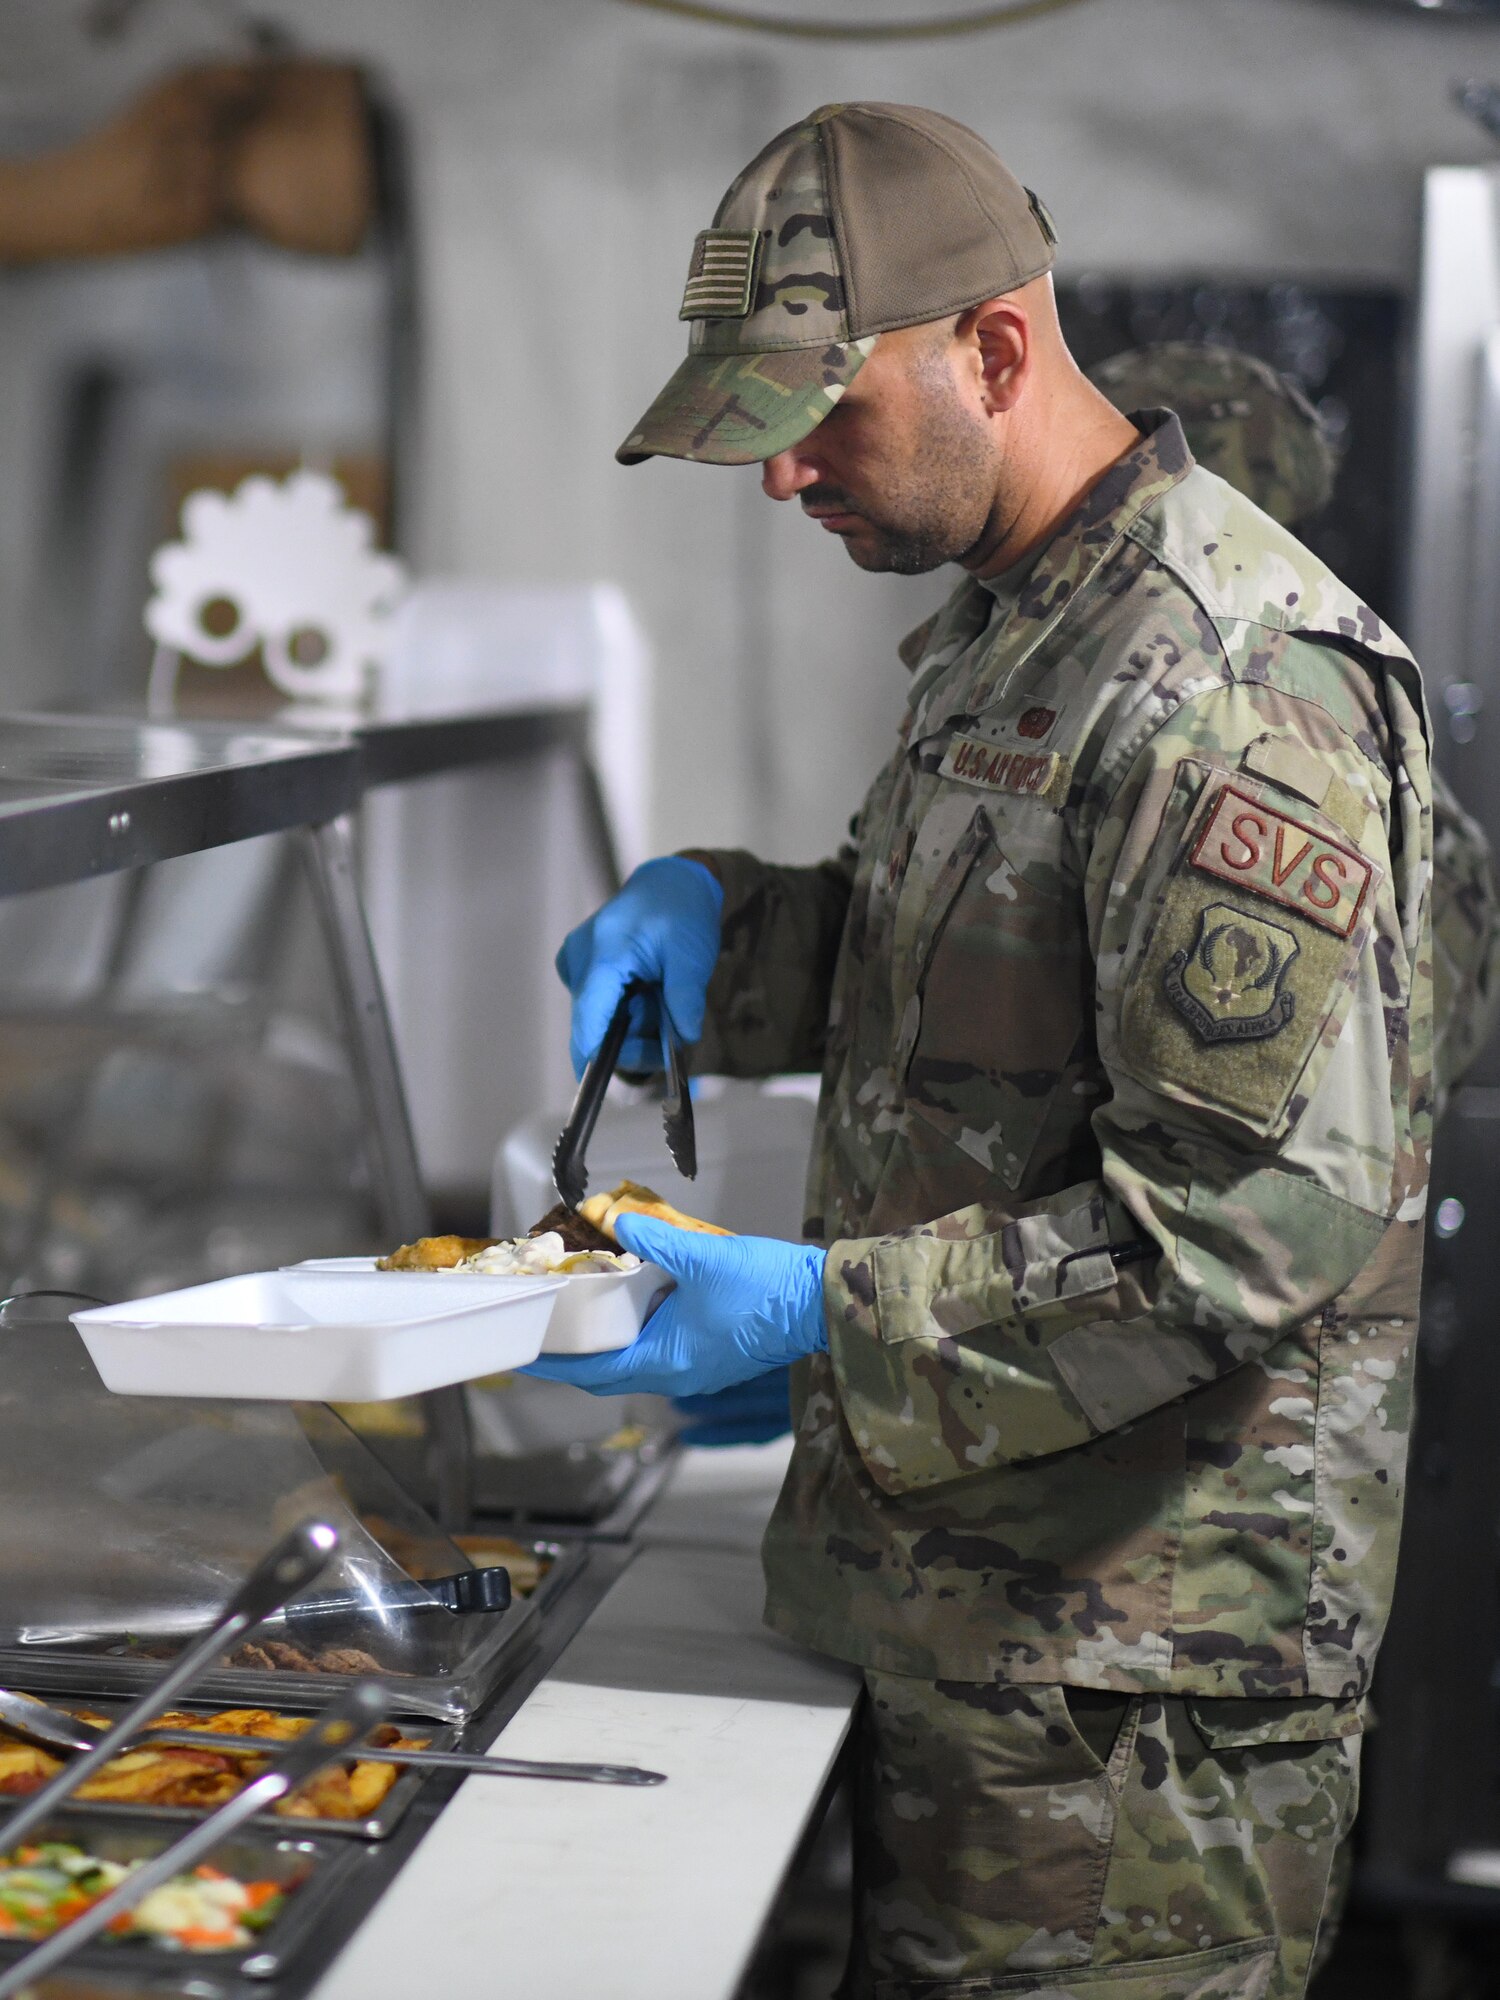 U.S. Air Force Staff Sgt. Carlos Ortega, 776th Expeditionary Air Base Squadron Services NCO in-charge of food and beverages, serves food to dining facility patrons at Chabelley Airfield, Djibouti, Nov. 13, 2109. The services Airmen receive, inspect, prepare and serve roughly 800 meals each day to Airmen, Soldiers and contractors fulfilling their duties on the airfield. (U.S. Air Force photo by Staff Sgt. Alex Fox Echols III)